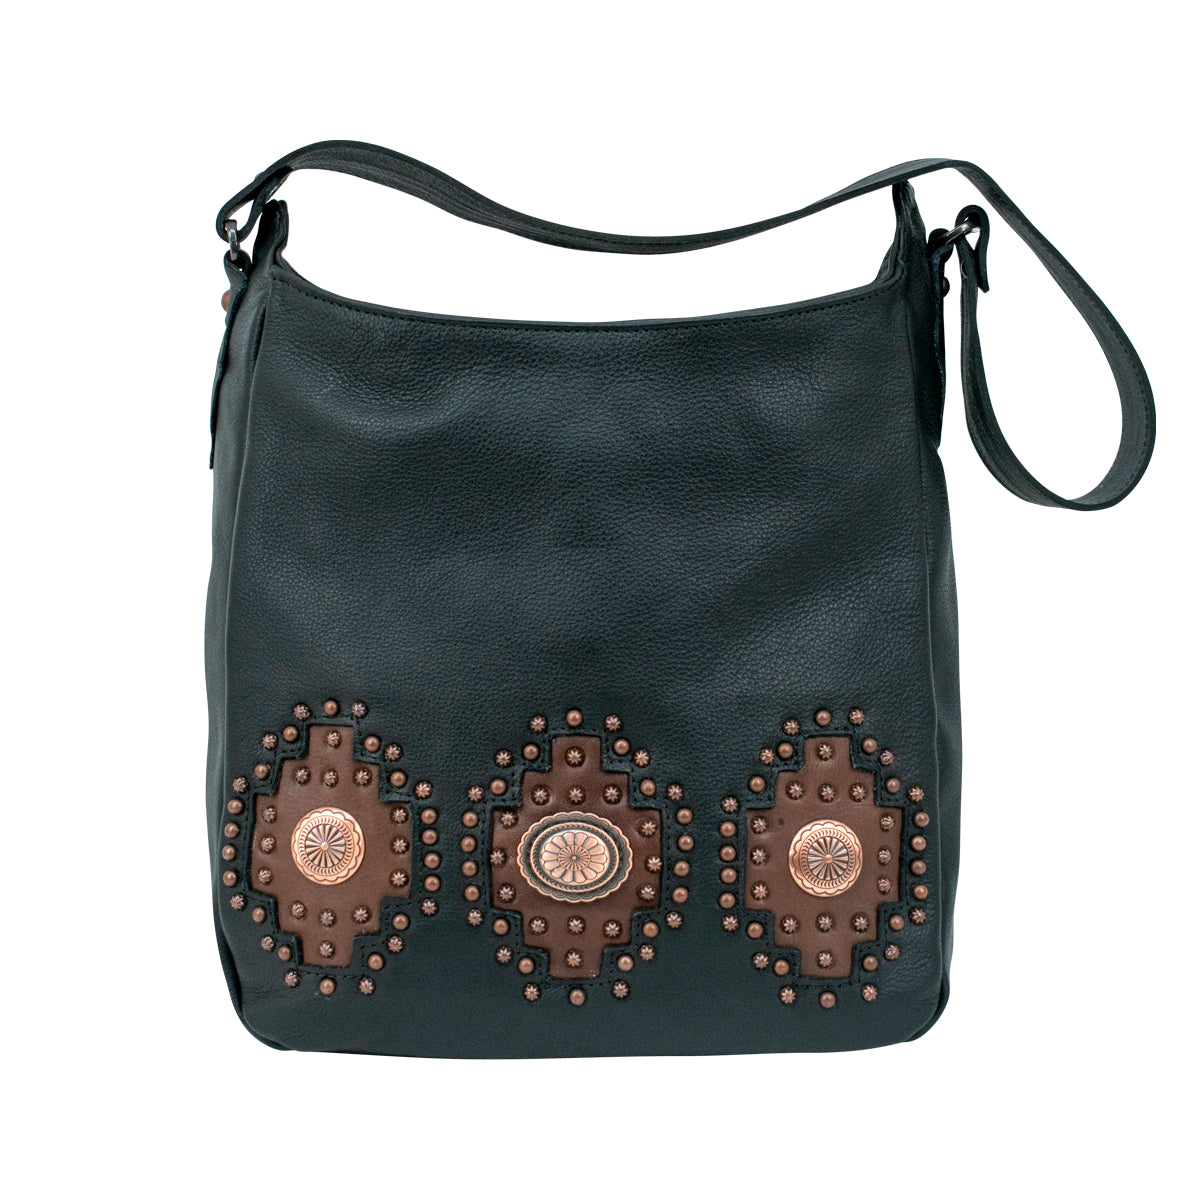 Concealed Carry Bag  Midnight Copper Concealed Carry Hobo Bag from American West